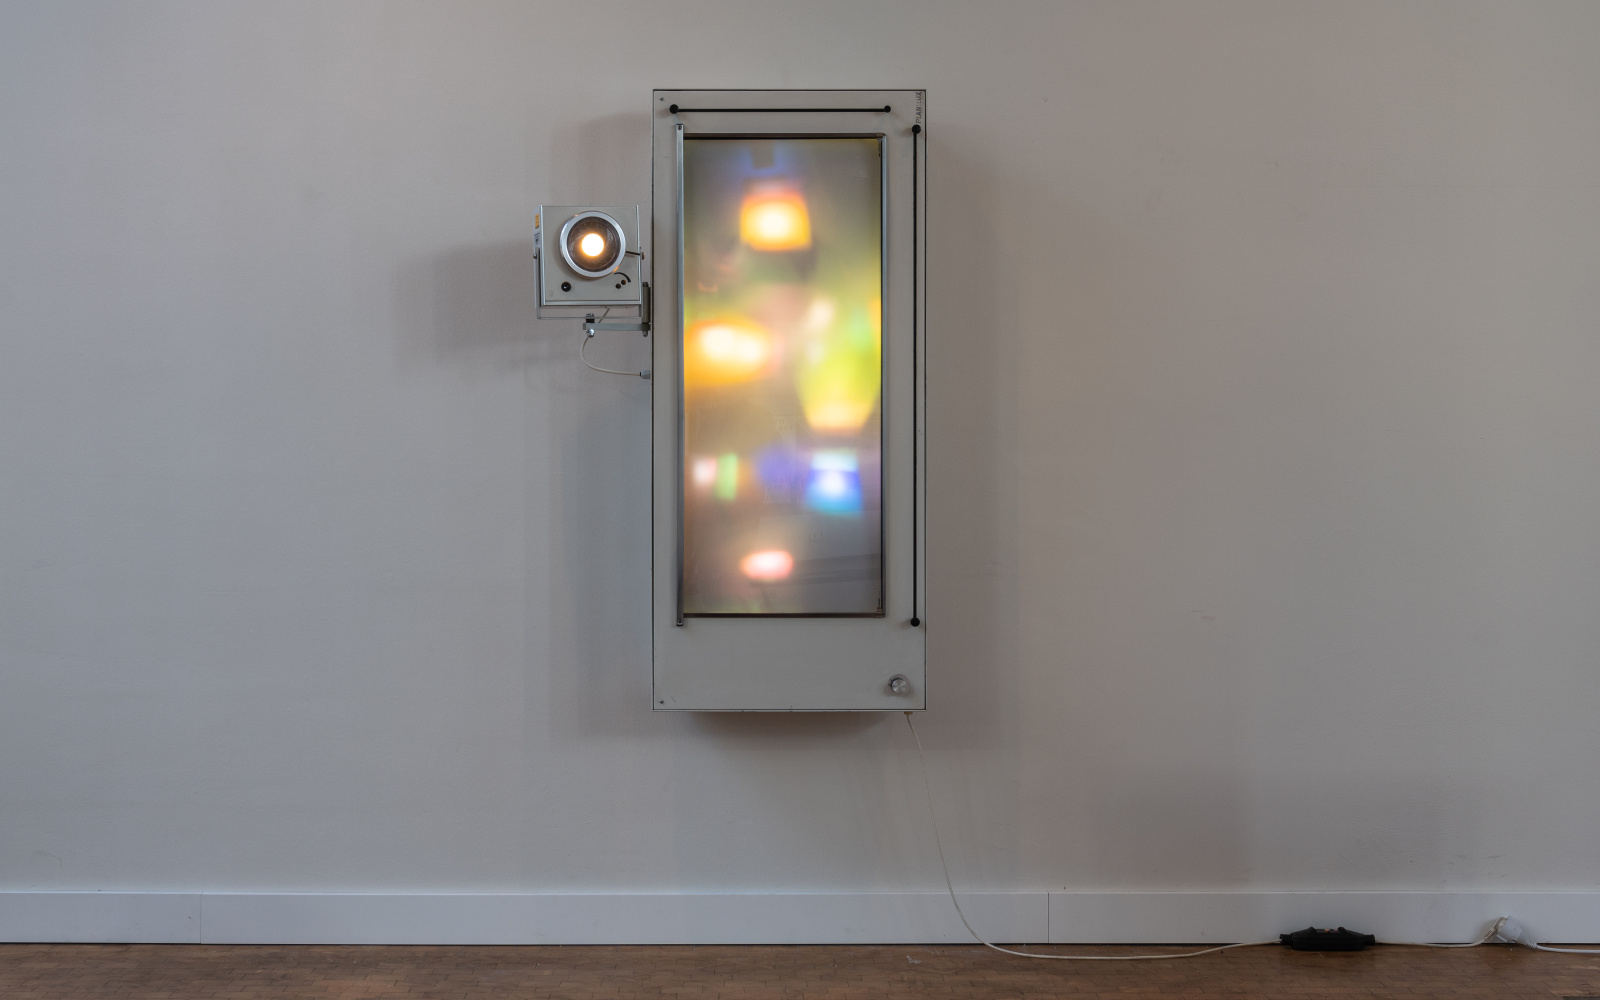 On display is the kinetic light object »Fokus«